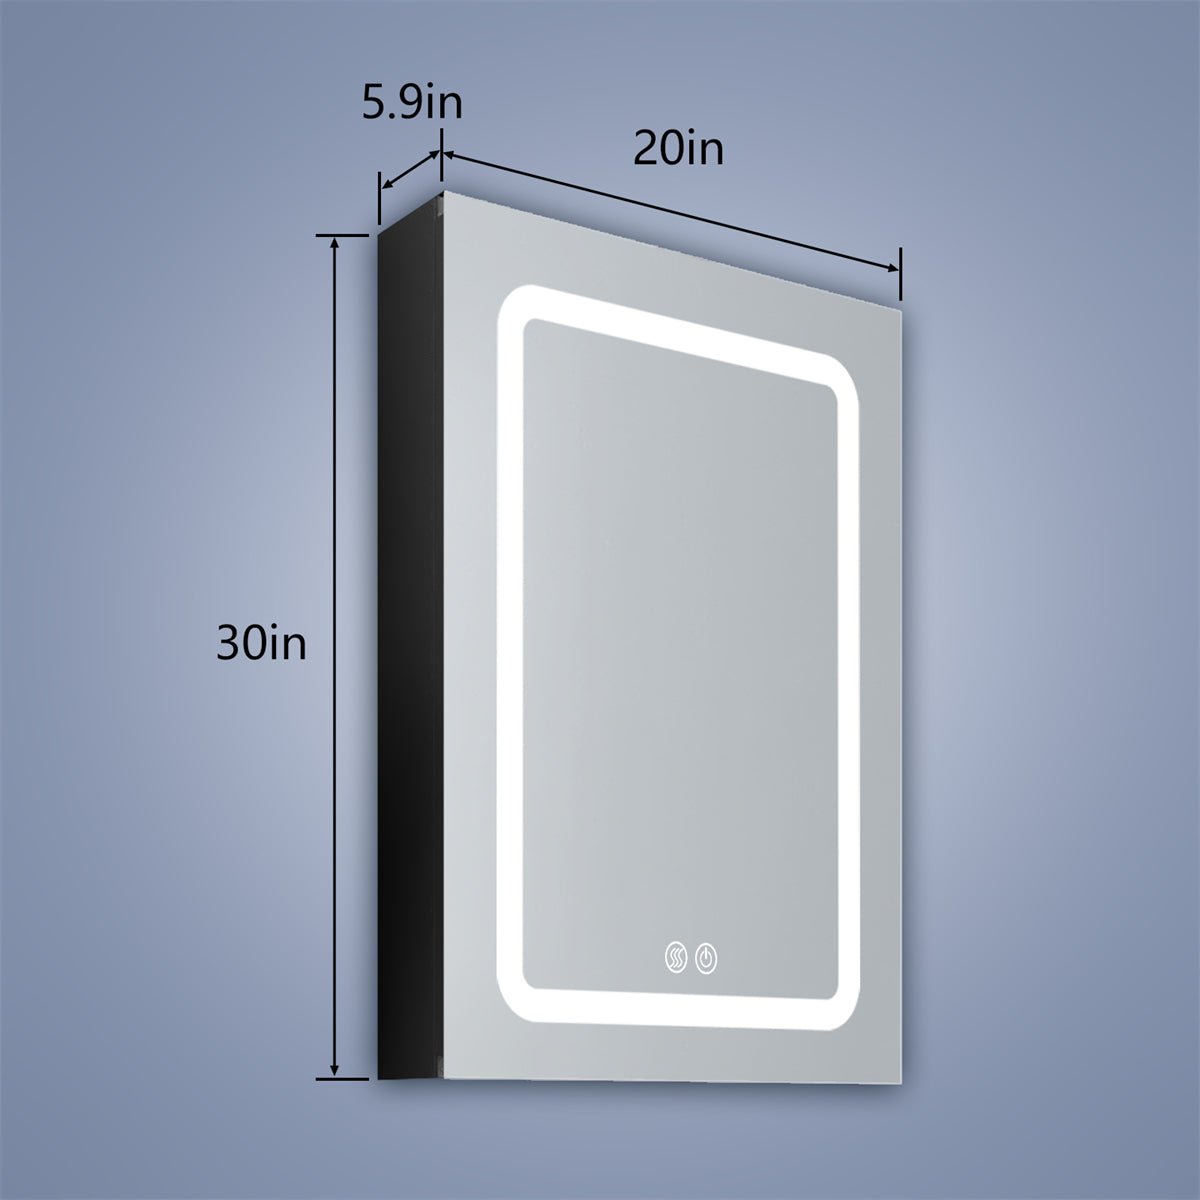 ExBrite 20" W x 30" H LED Bathroom Medicine Cabinets Surface Mounted Left Open